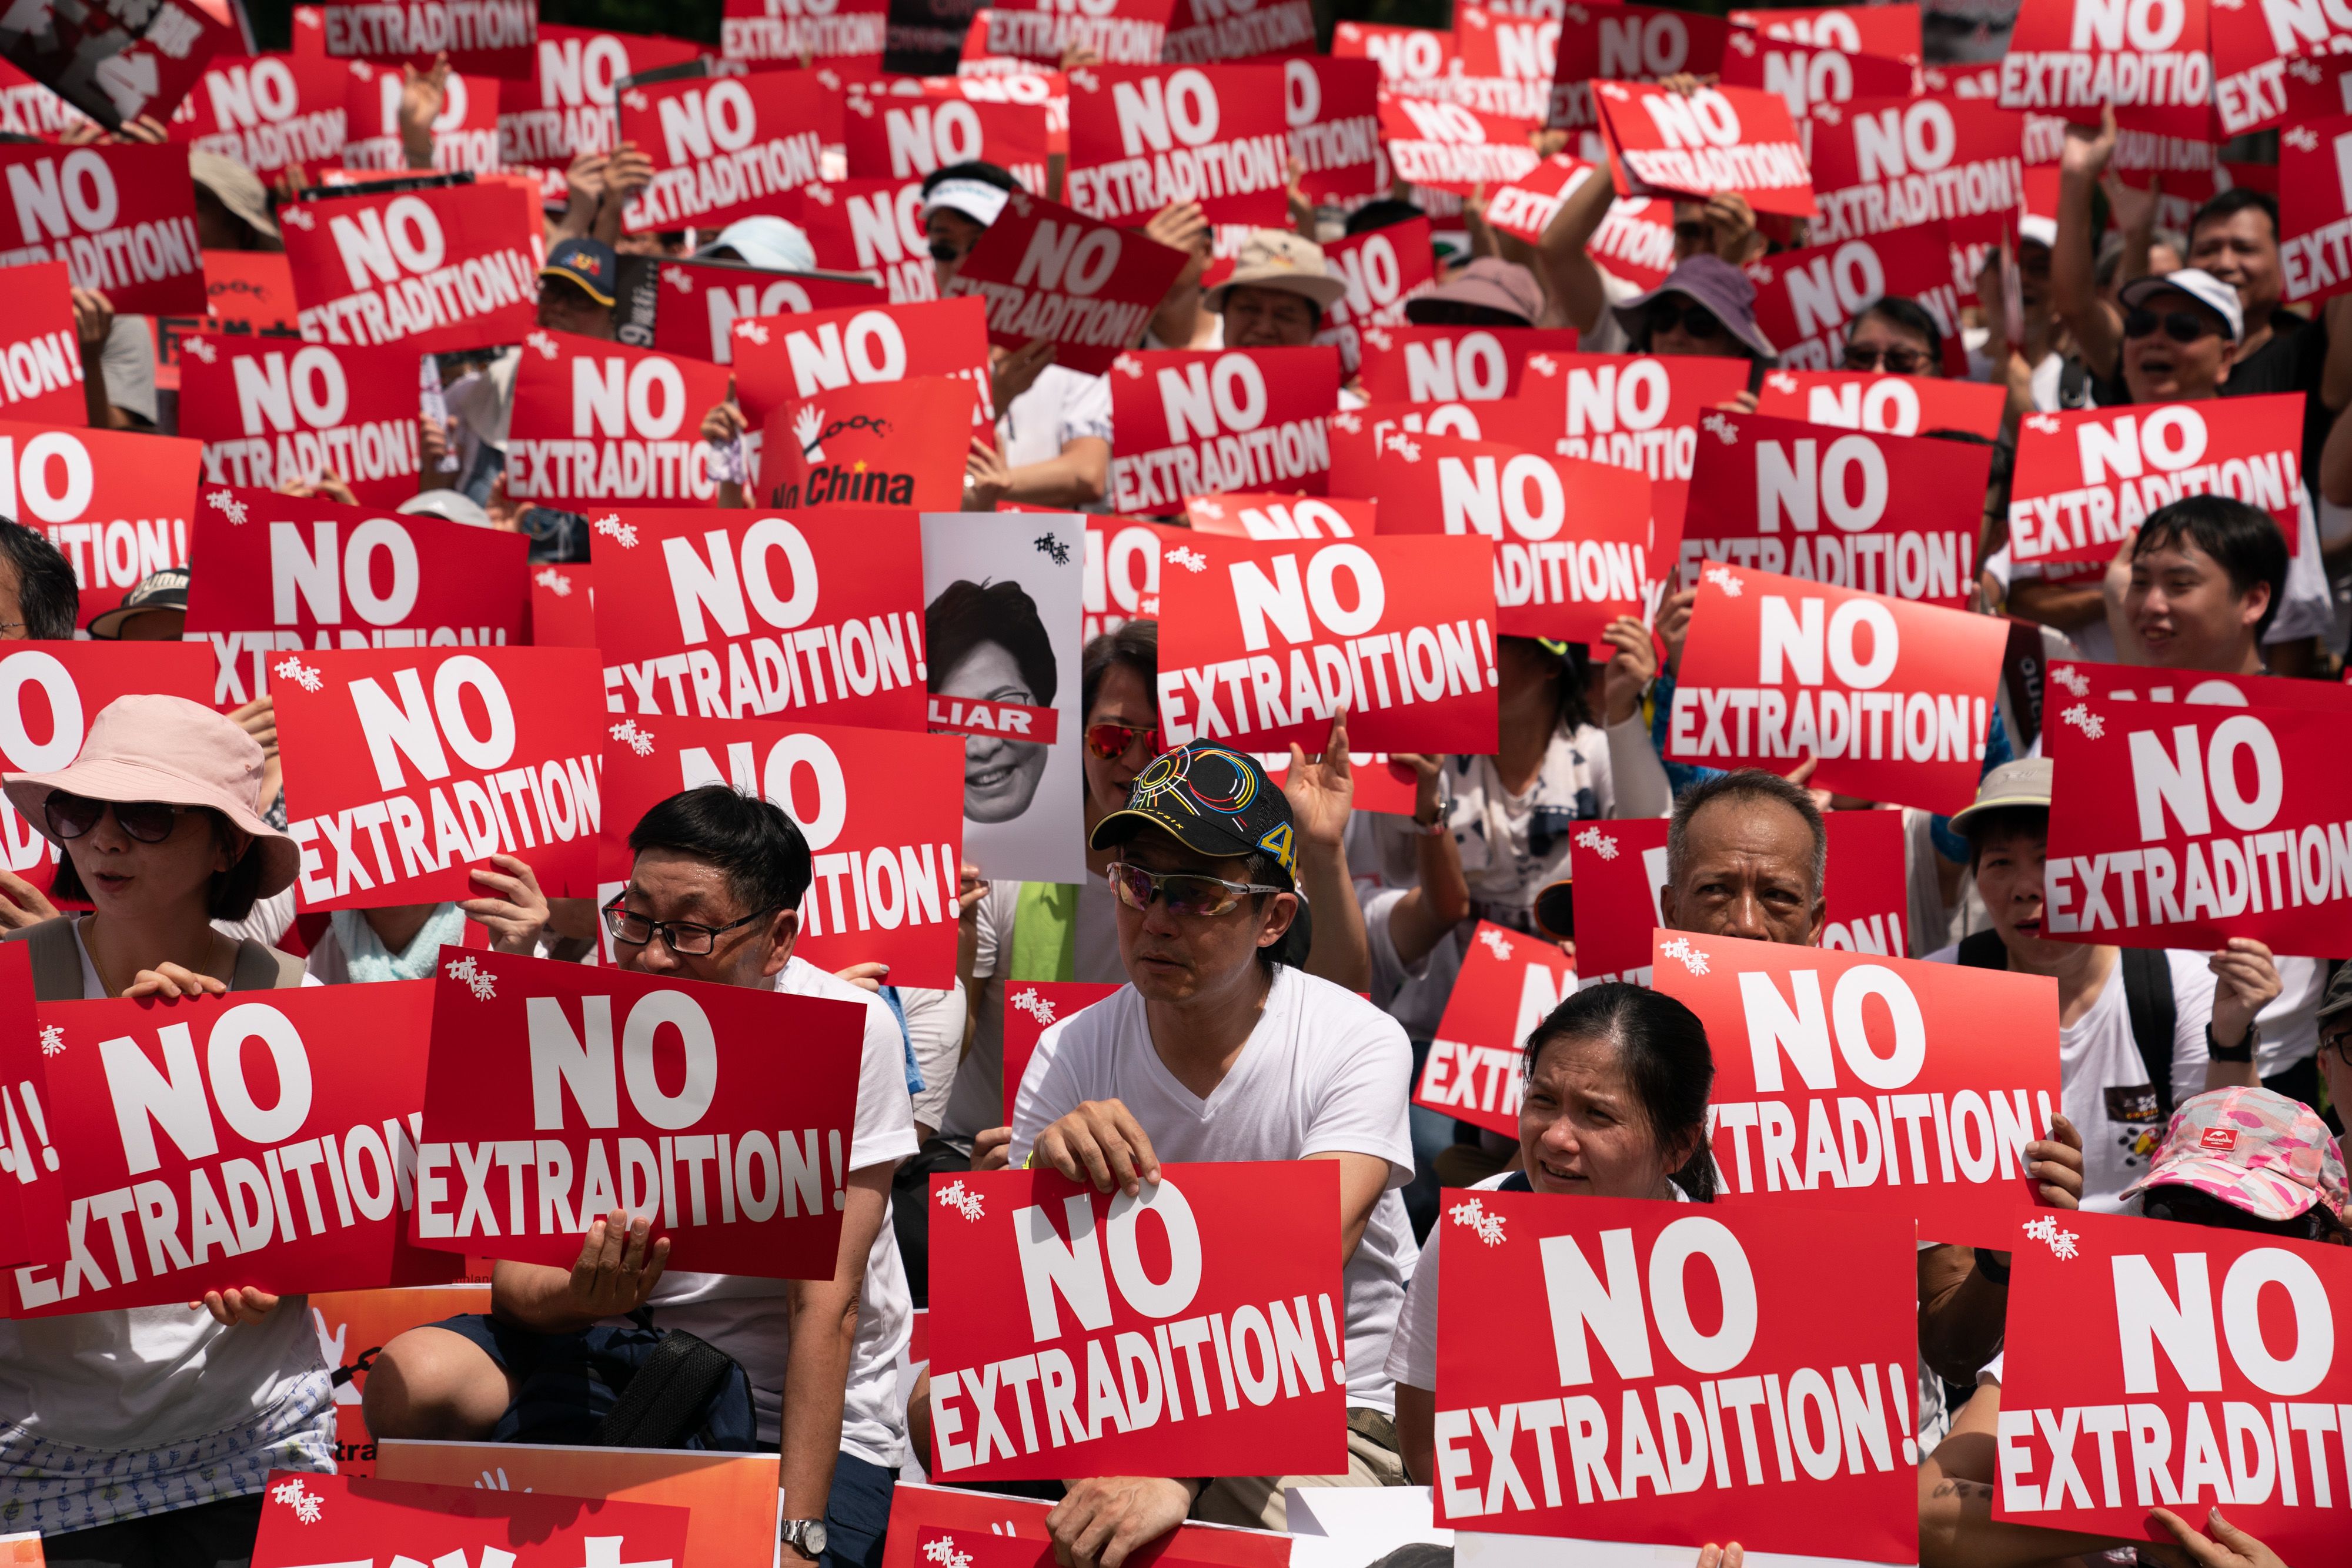 Hide and Seek - China's Extradition Problem: A manual on